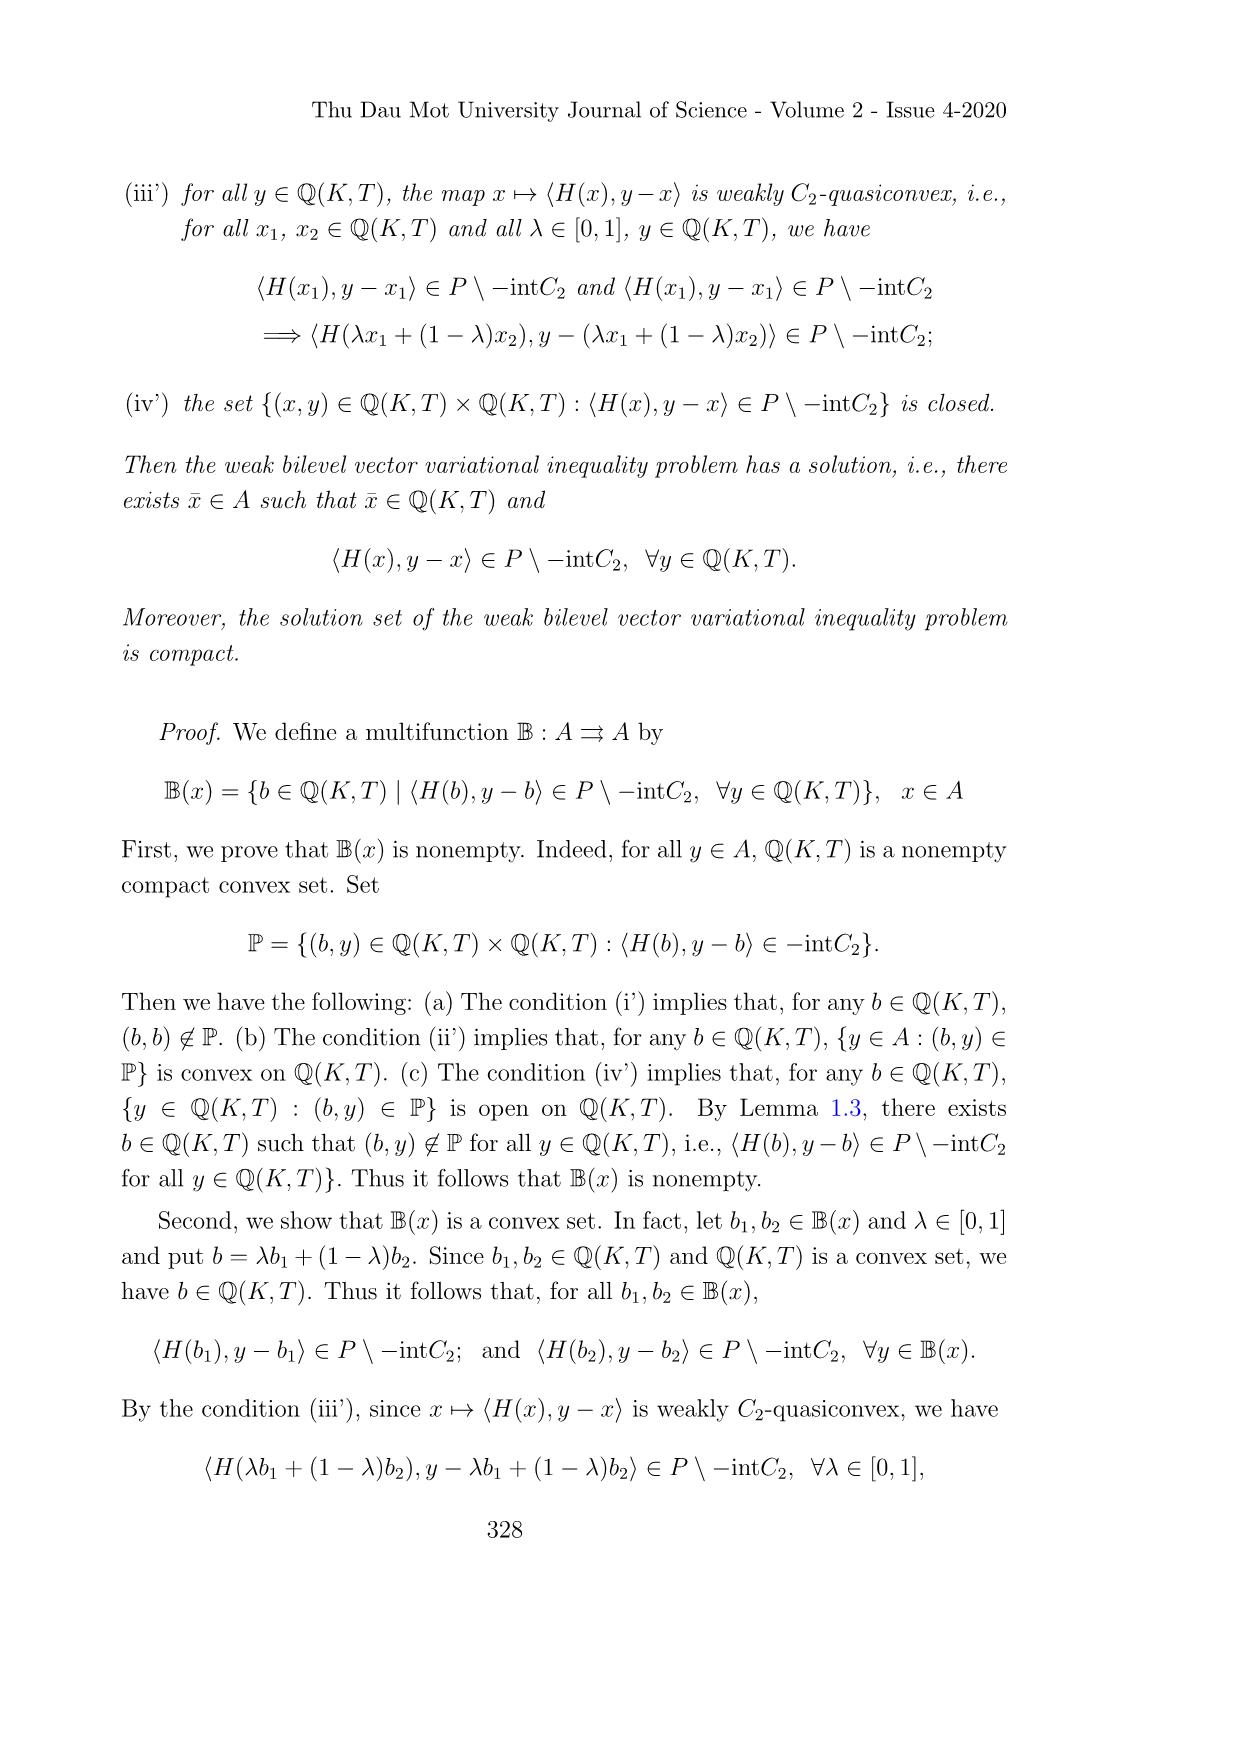 A new class of bilevel weak vector variational inequality problems trang 8